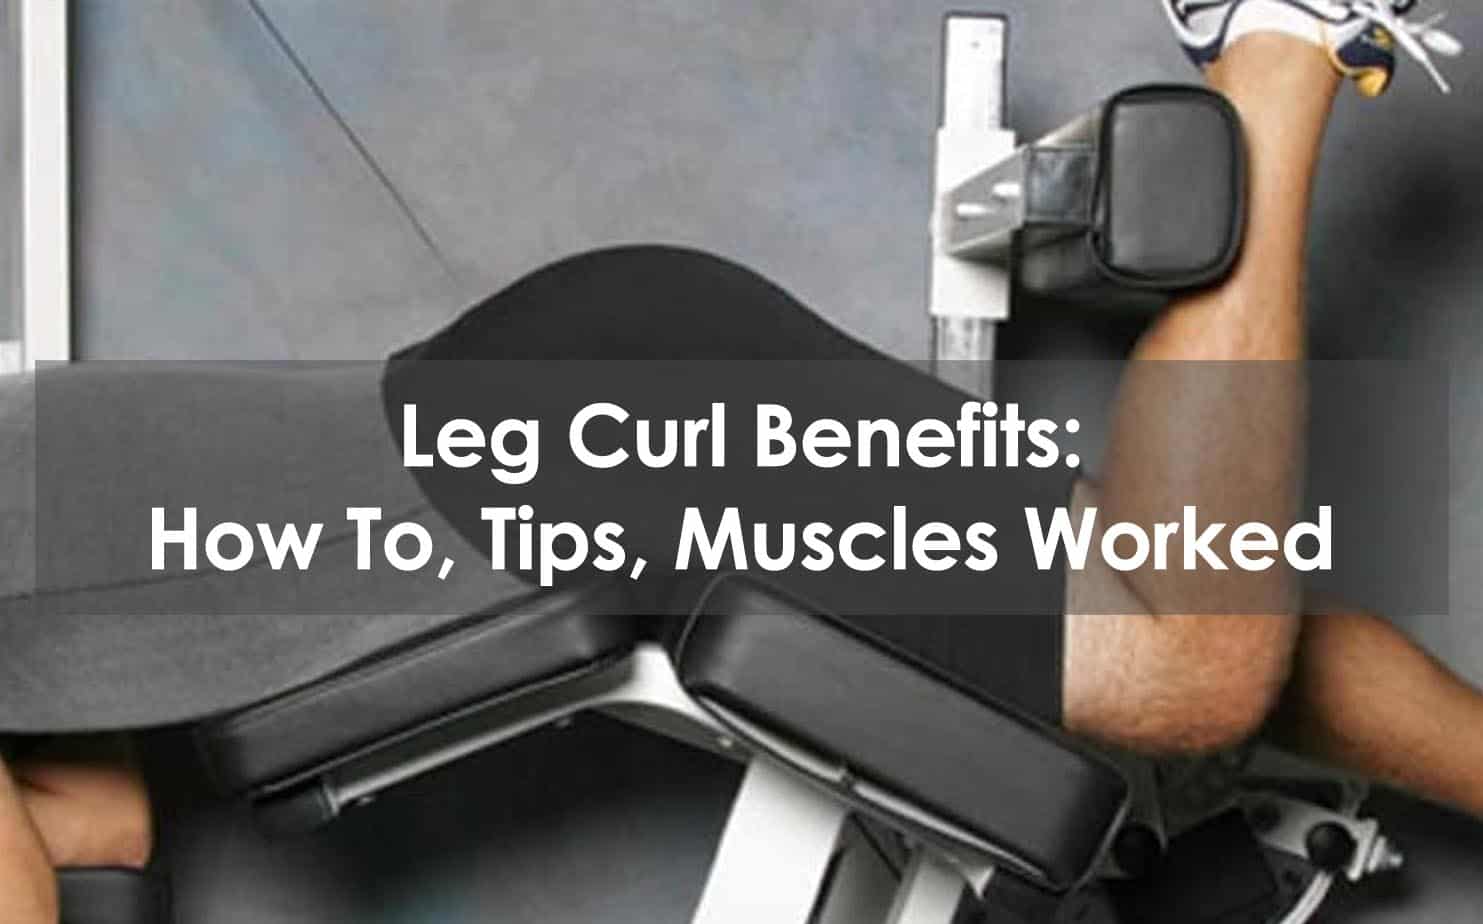 Leg Curl Benefits: How To, Tips, Muscles Worked